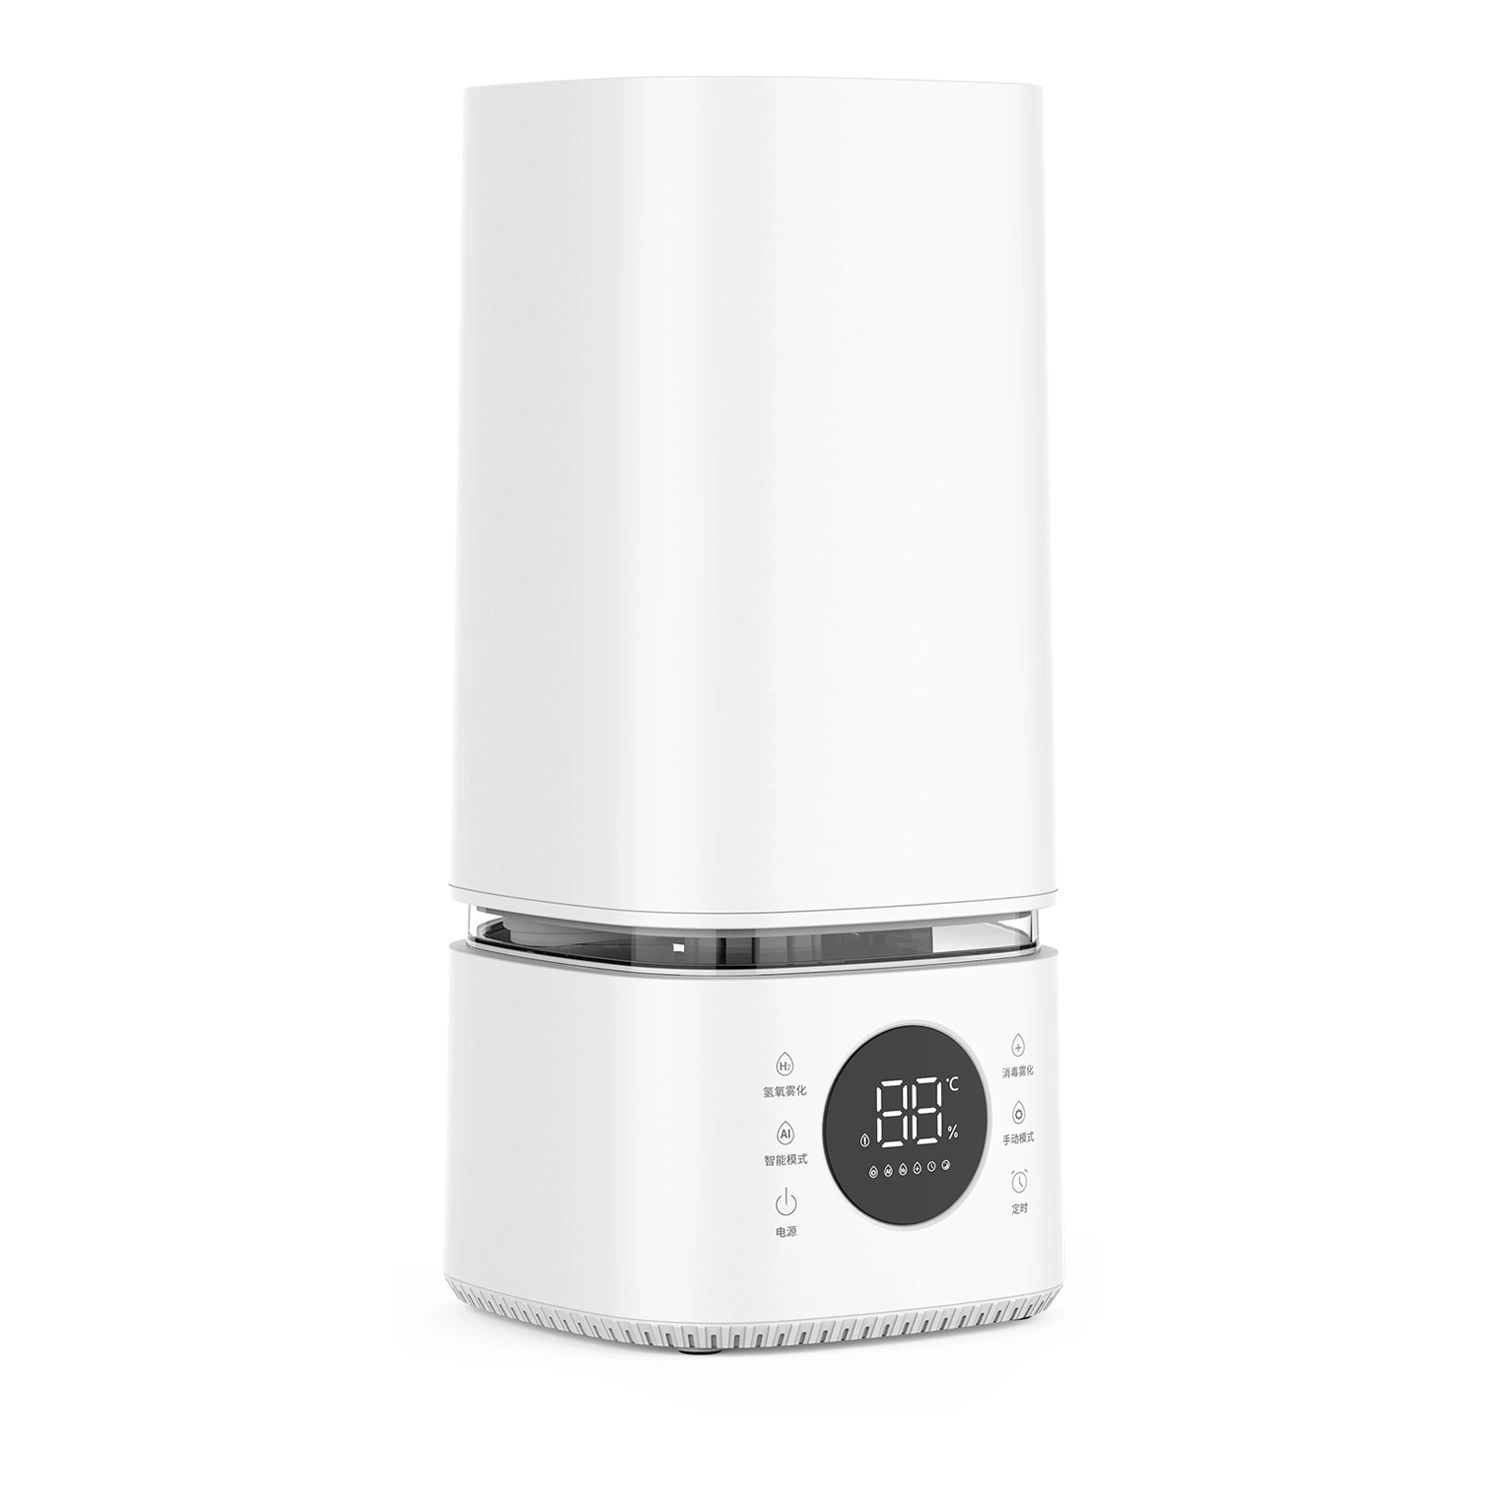 Olansi Pm2.5 Sensor Best Humidifier Air Purifiers Home for 45-60 M2 Air Purifier HEPA Filter